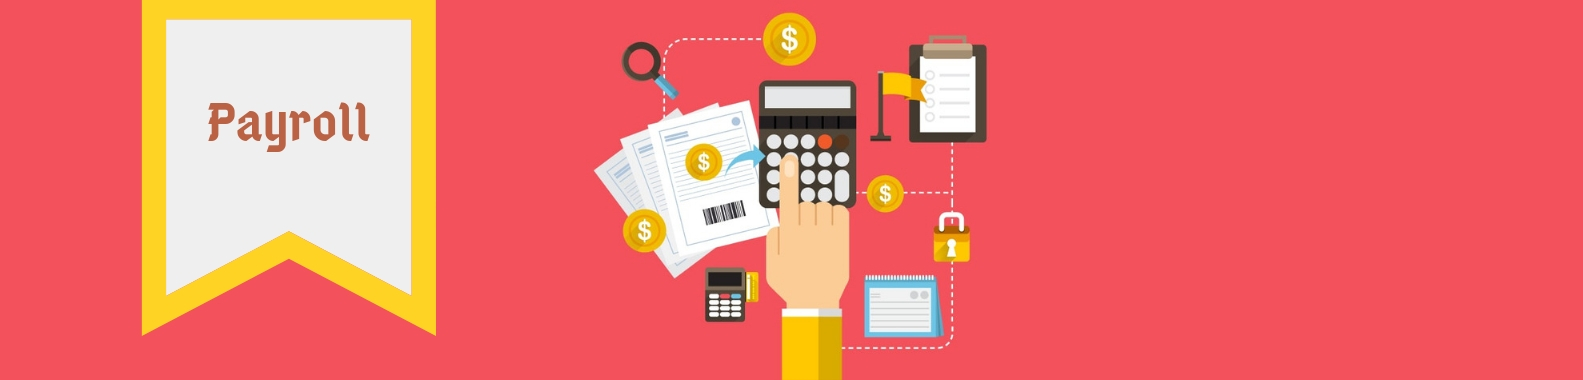 Why Should Small Businesses Acquire Payroll Processing Software?